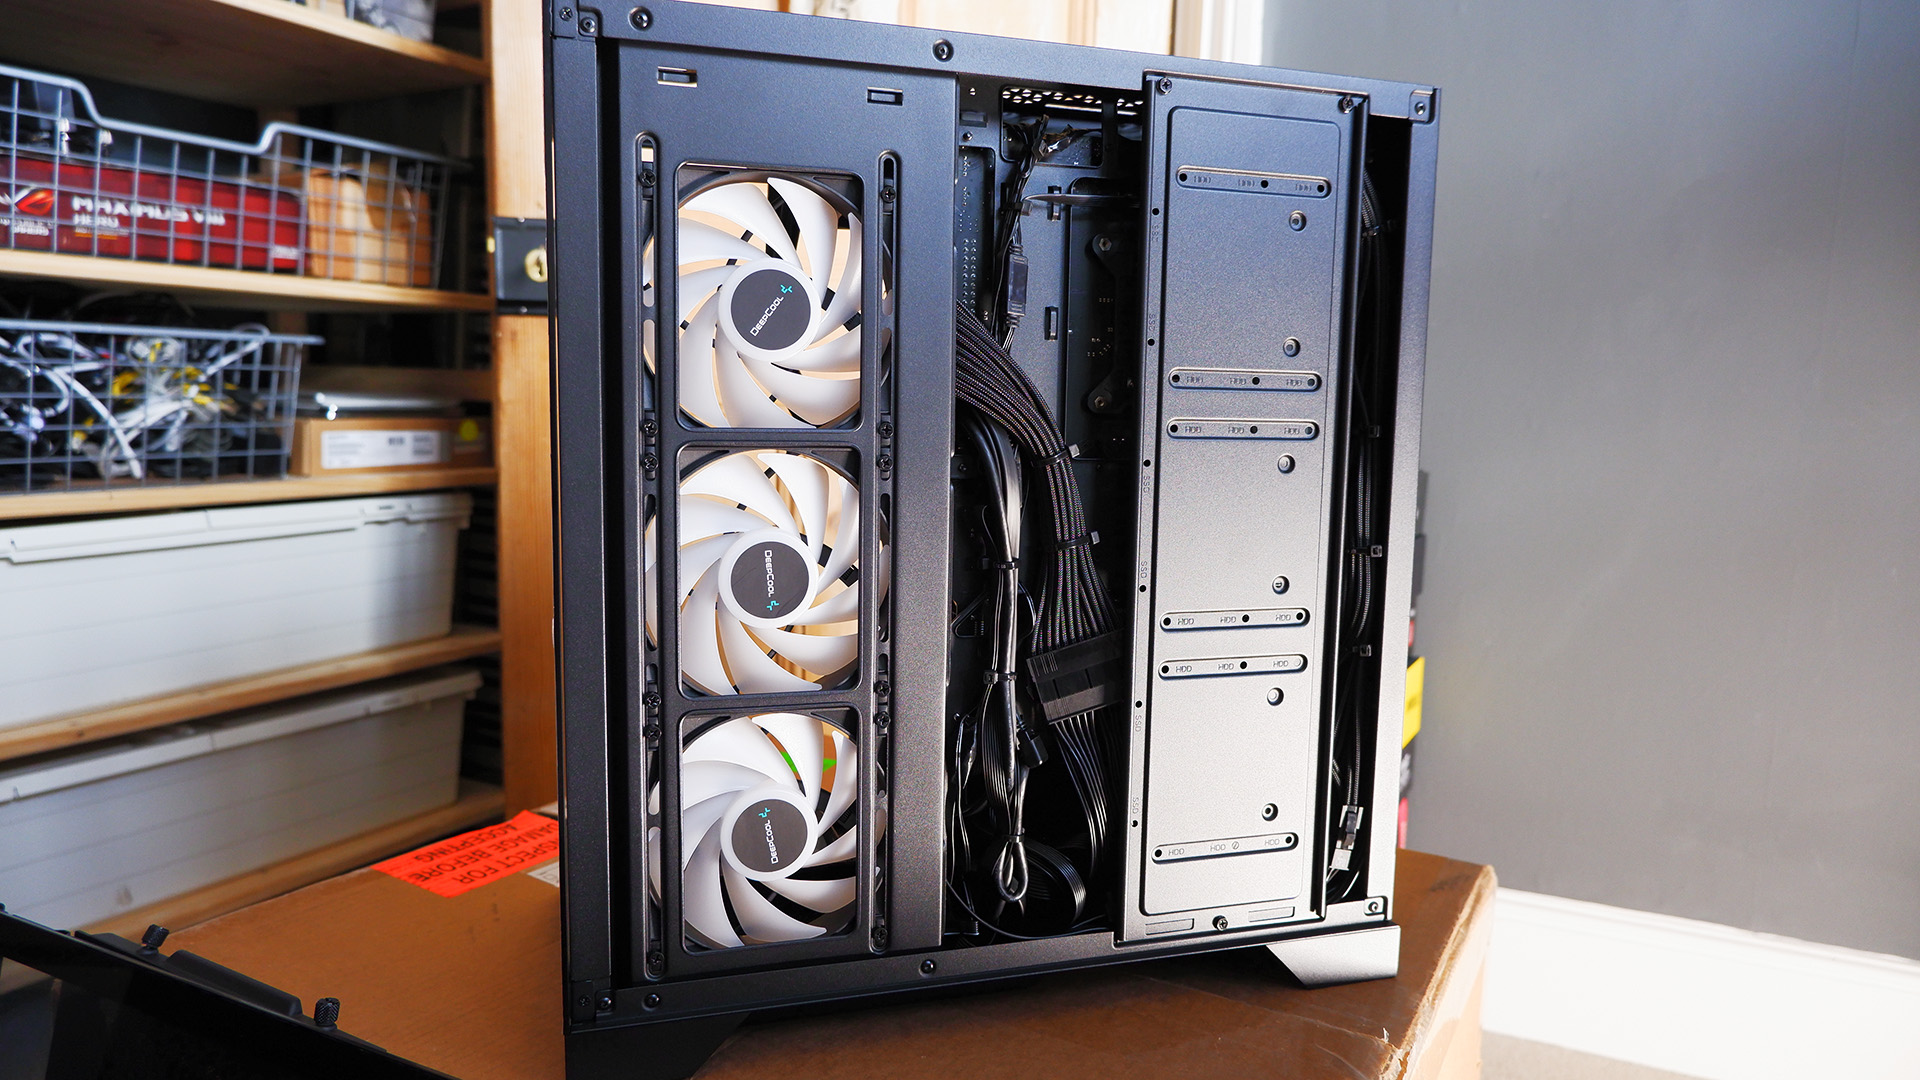 Starforge Systems Navigator Pro gaming PC unboxing and installation.